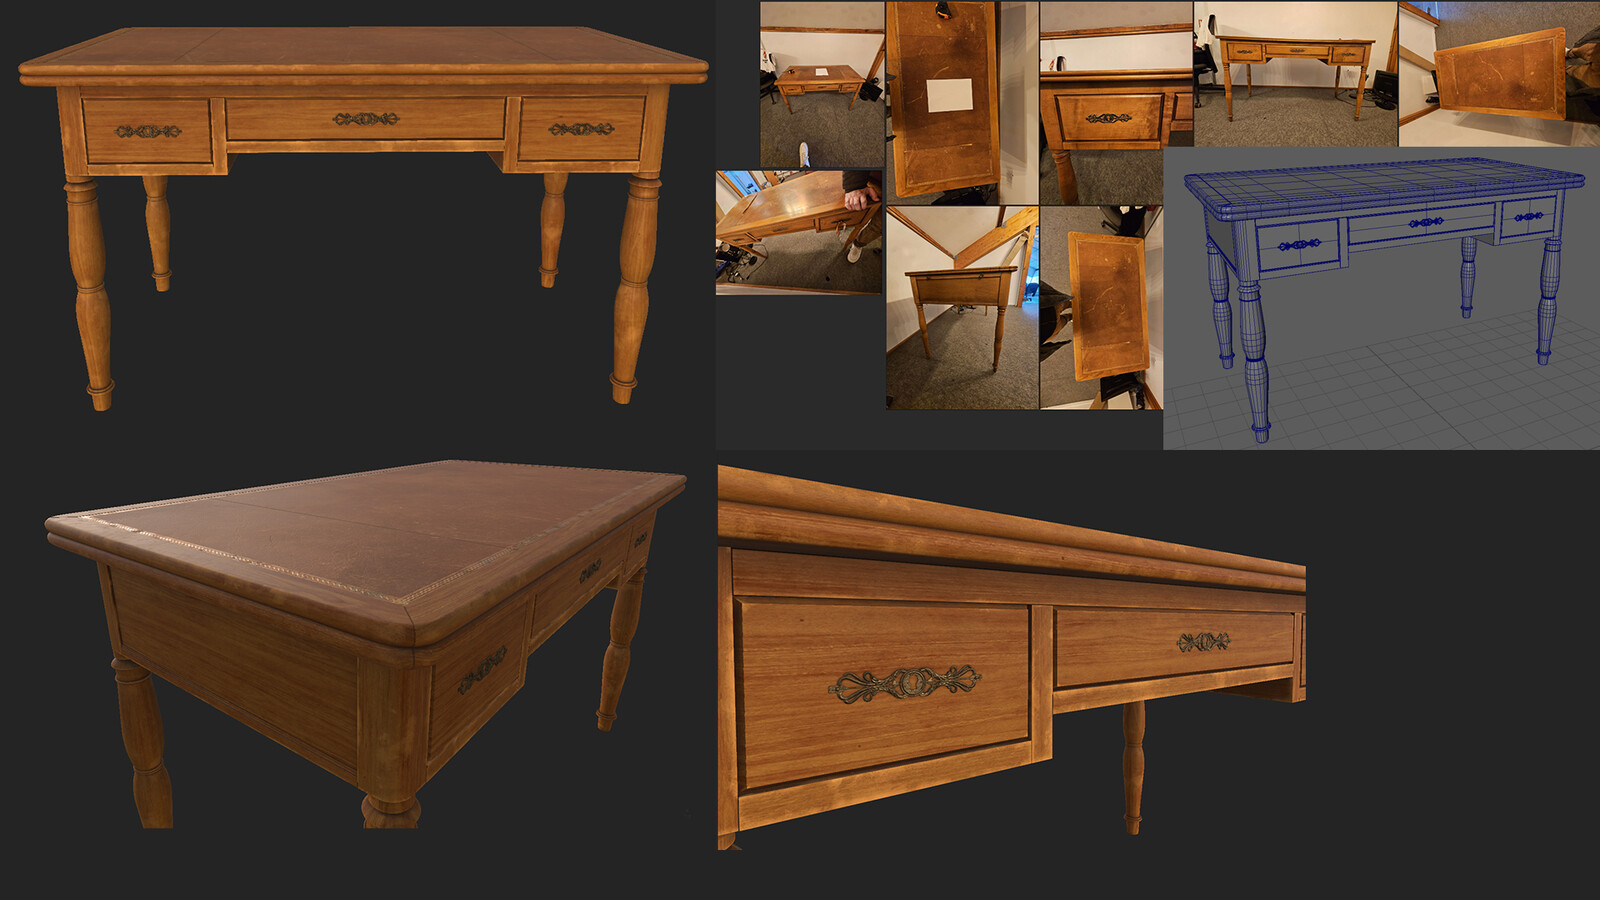 Substance painter view (Left) / Reference of the real desk (Right) + Modeling 